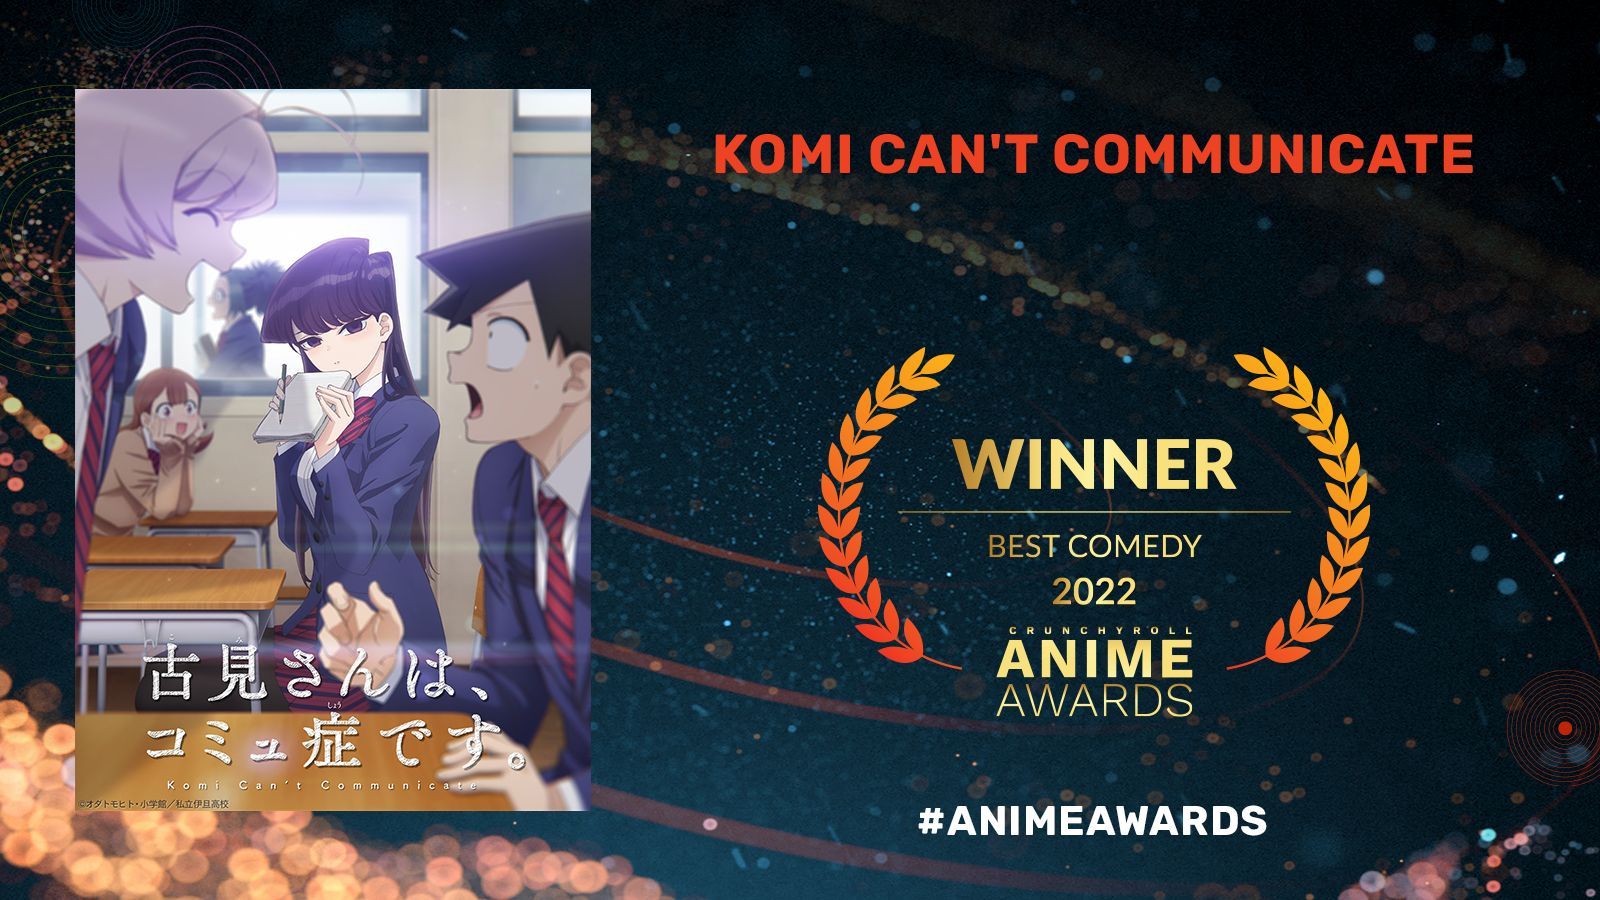 Anime Awards of 2015 (Warning Spoilers) - Film and TV - backpack.tf forums-demhanvico.com.vn